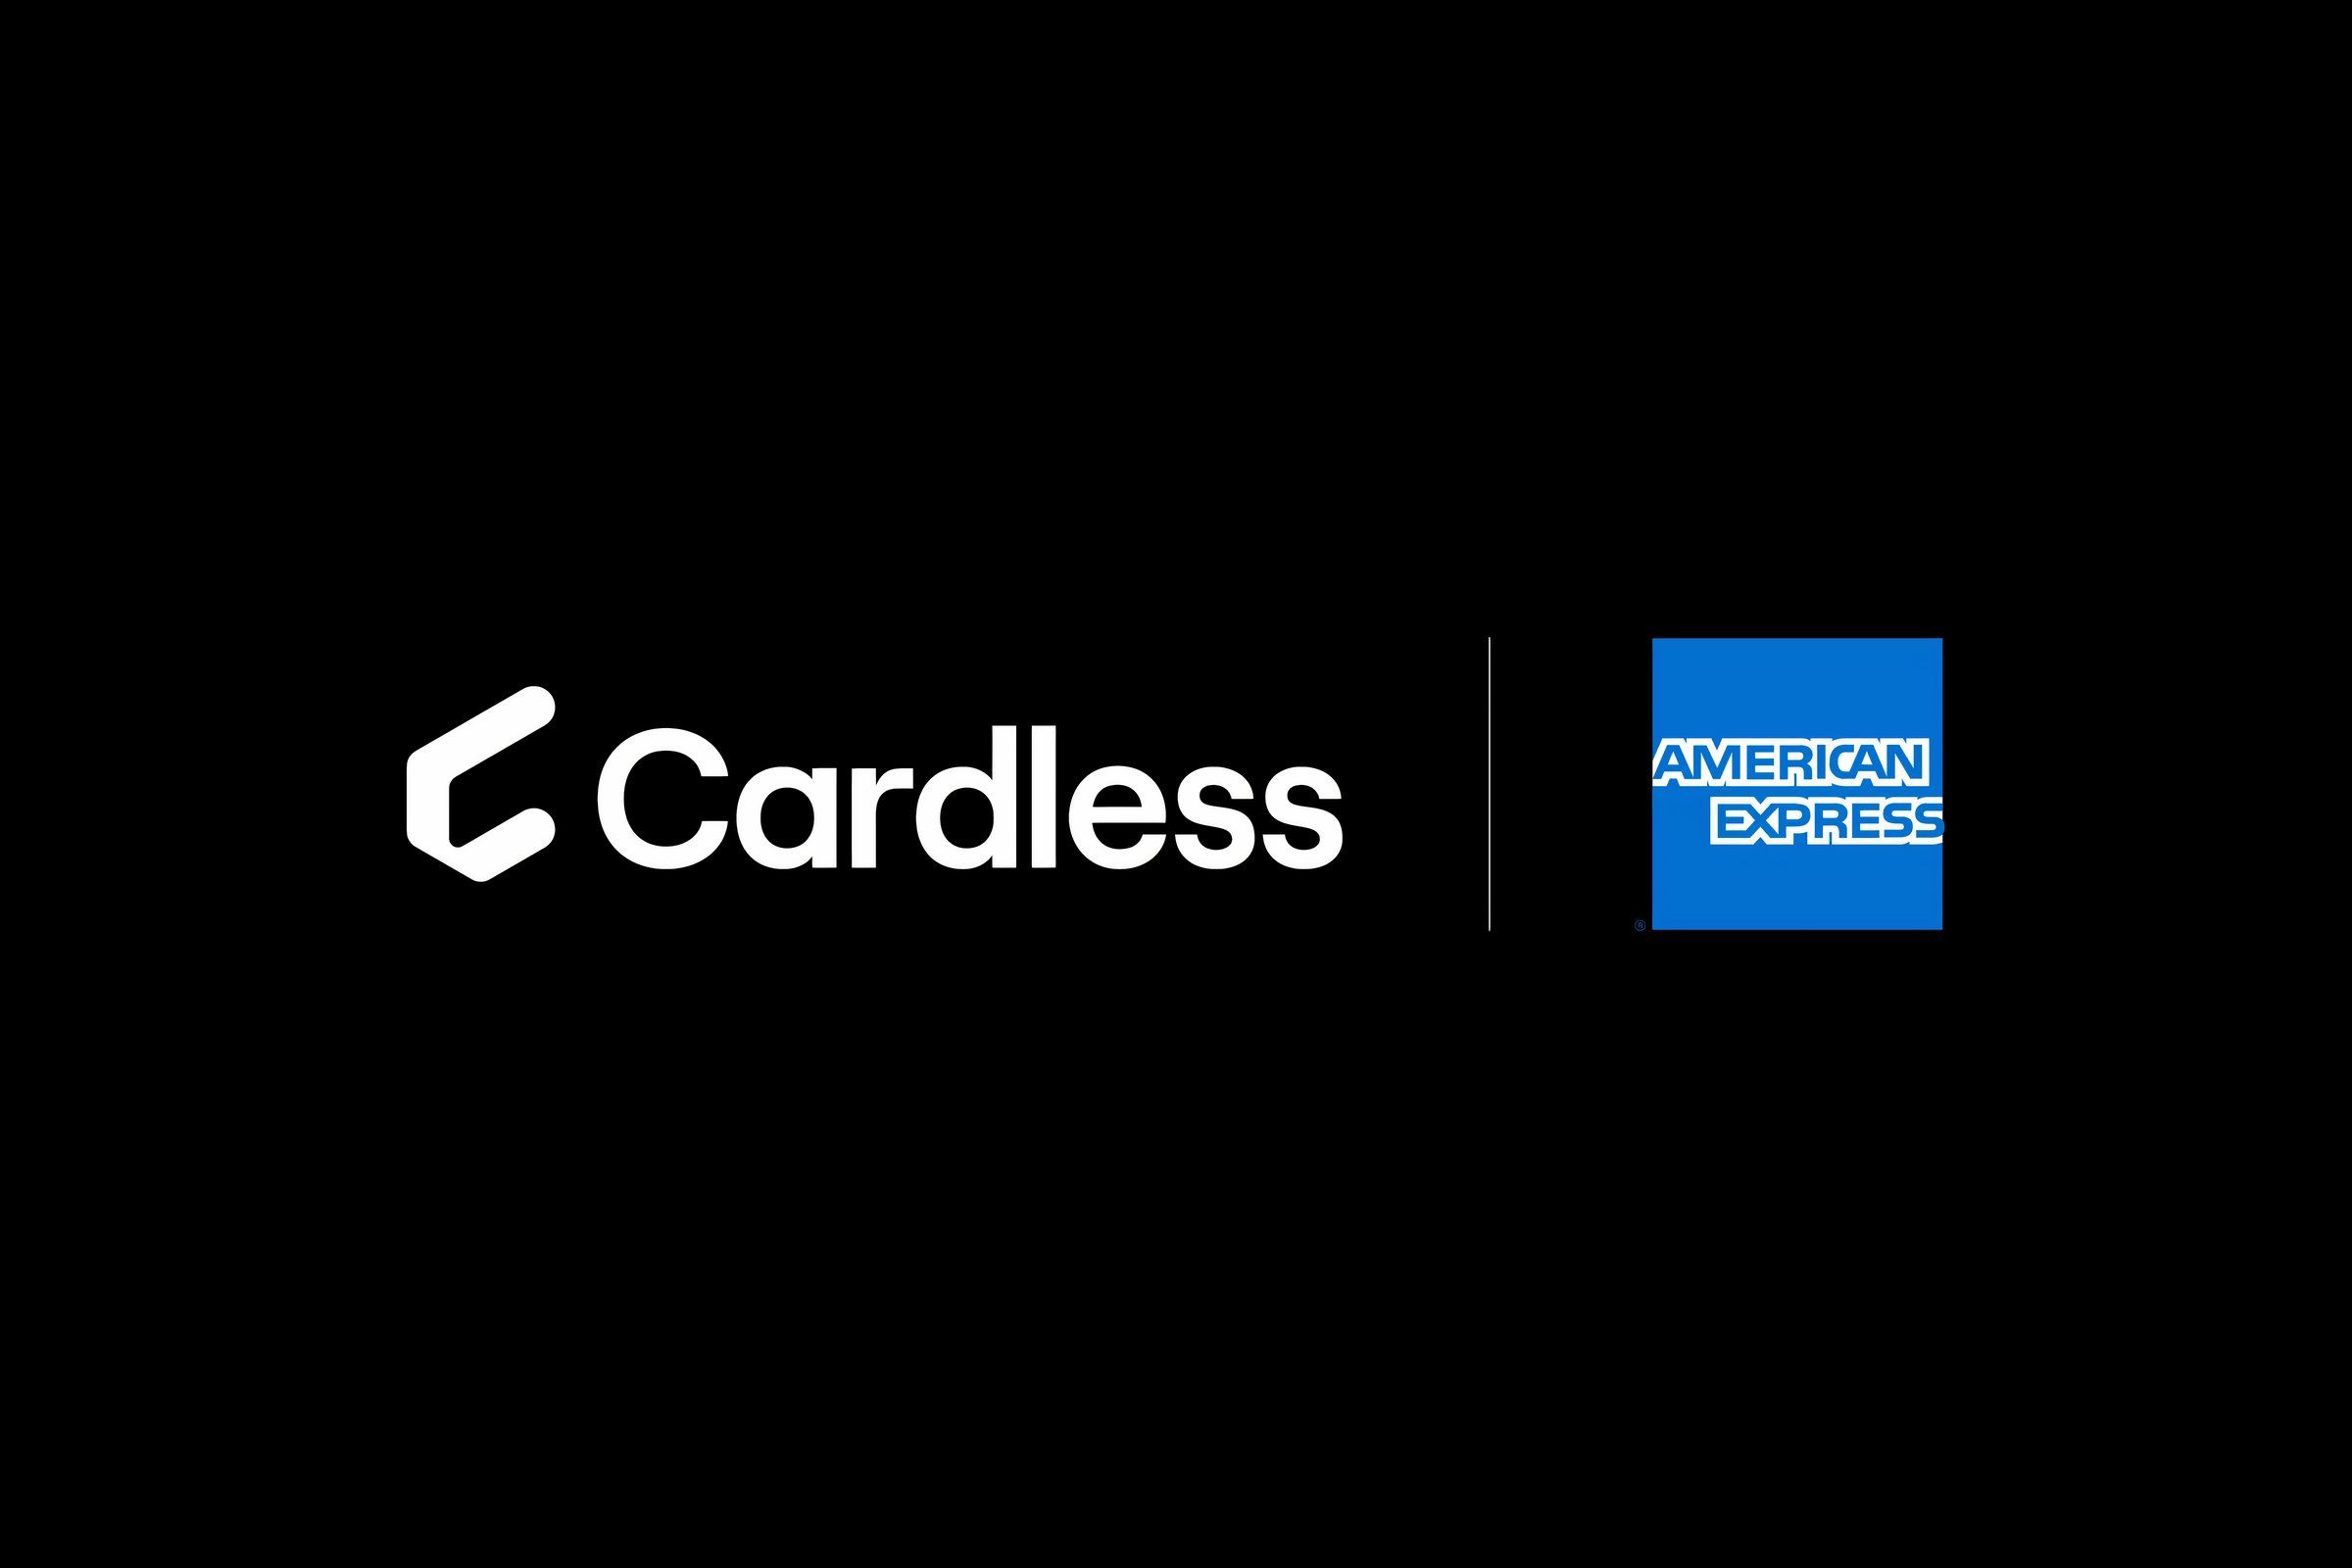 Cardless and American Express